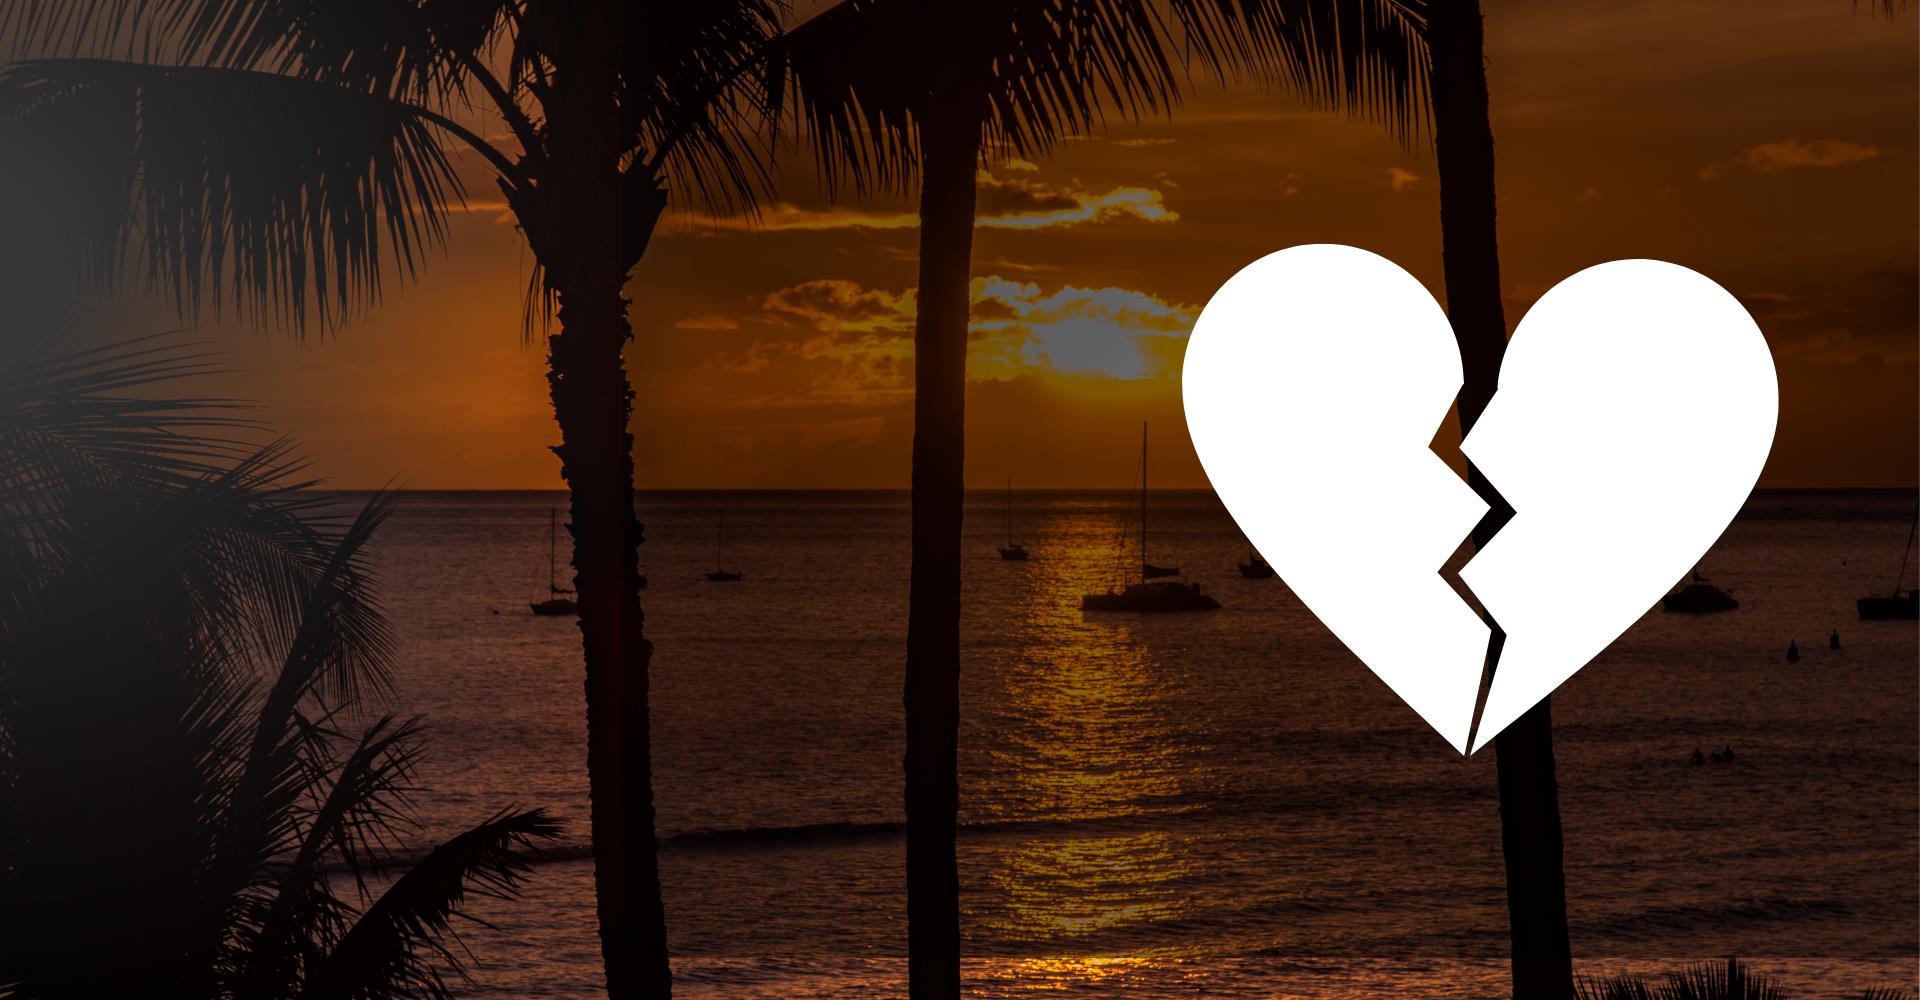 Tropical sunset with heartbroken image